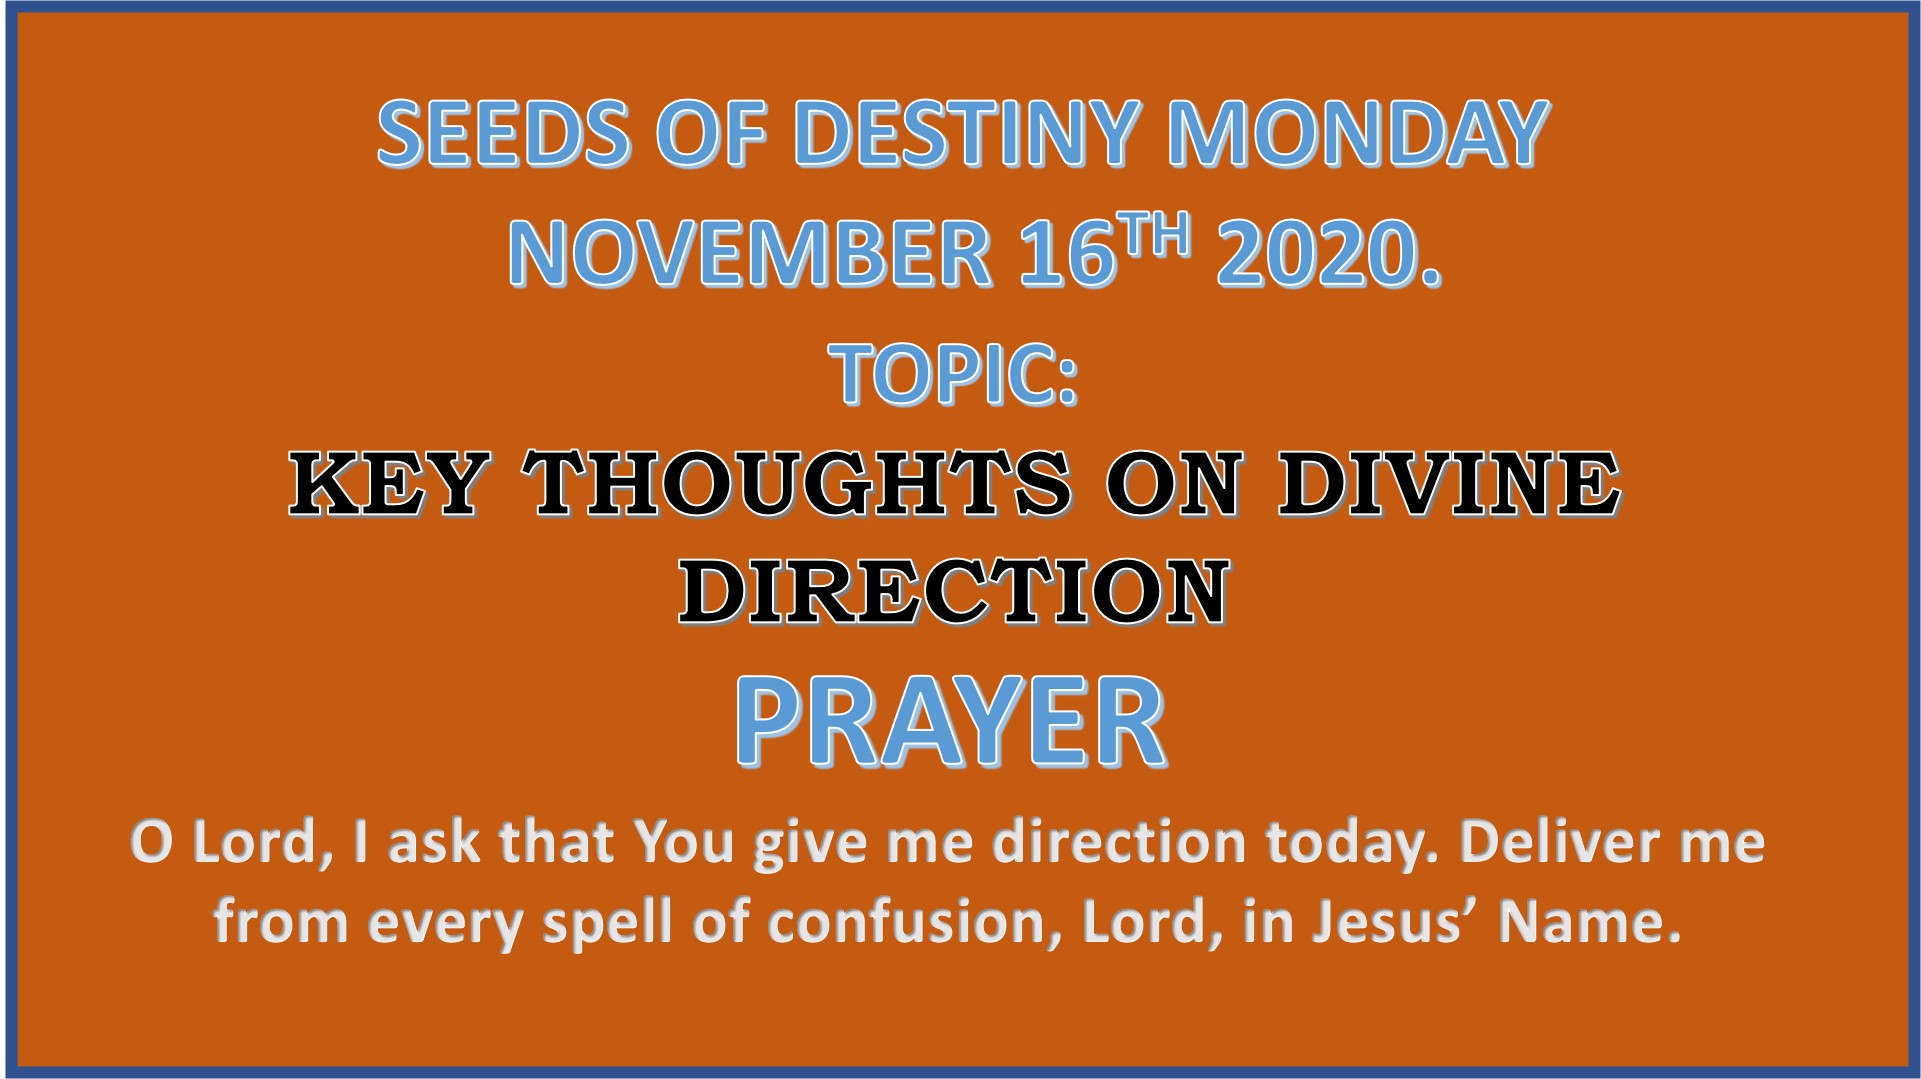 Seeds of Destiny Monday 16th November 2020 by Dr Paul Enenche